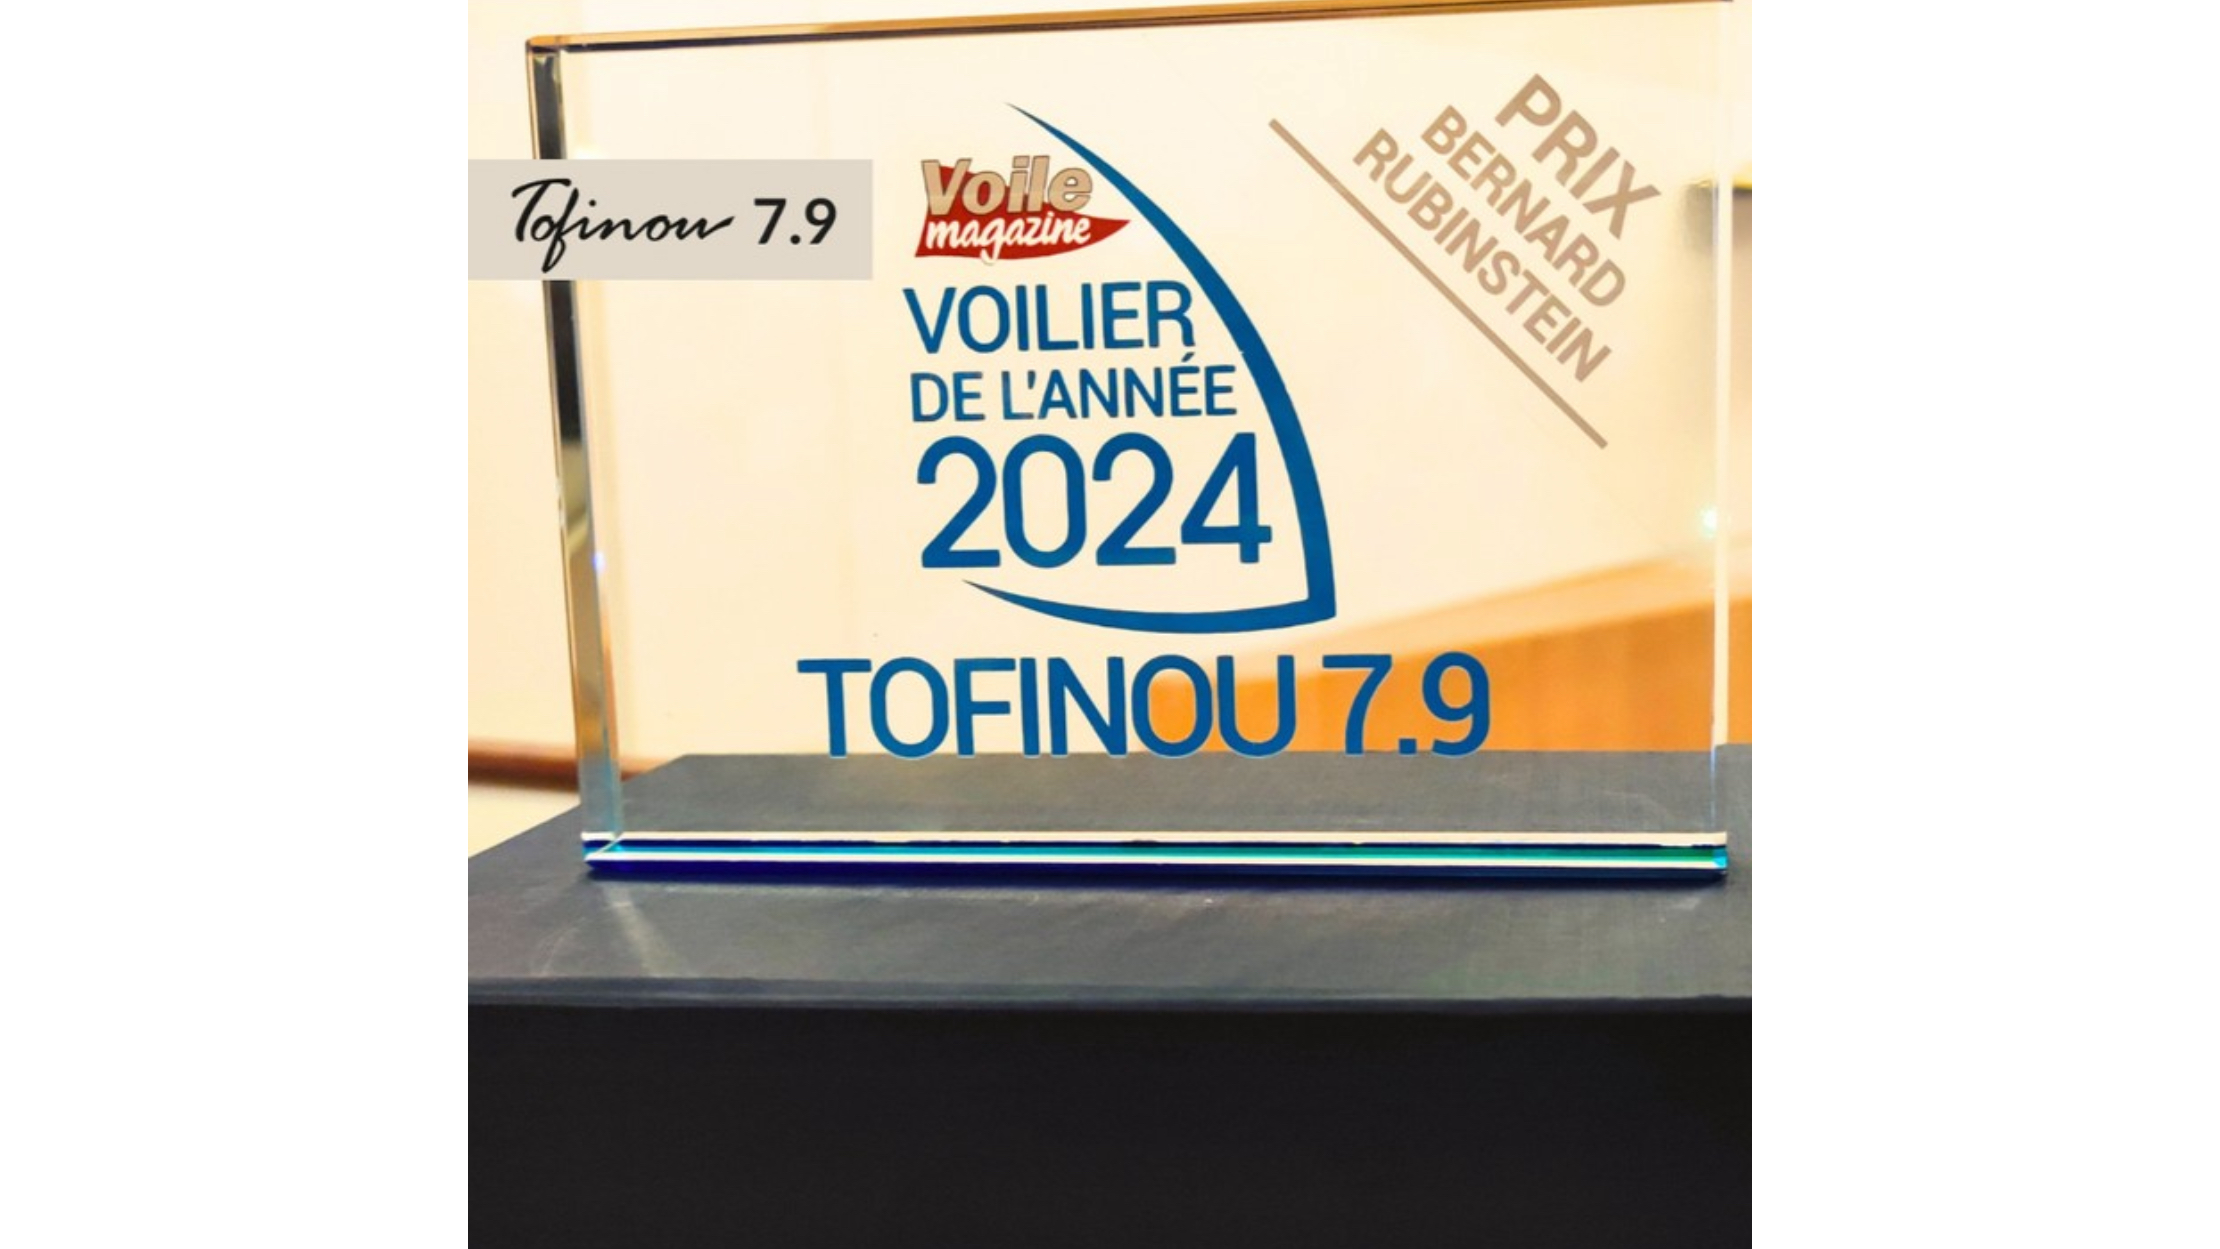 Tofinou 7.9 wins Sailboat of the Year Award for innovation